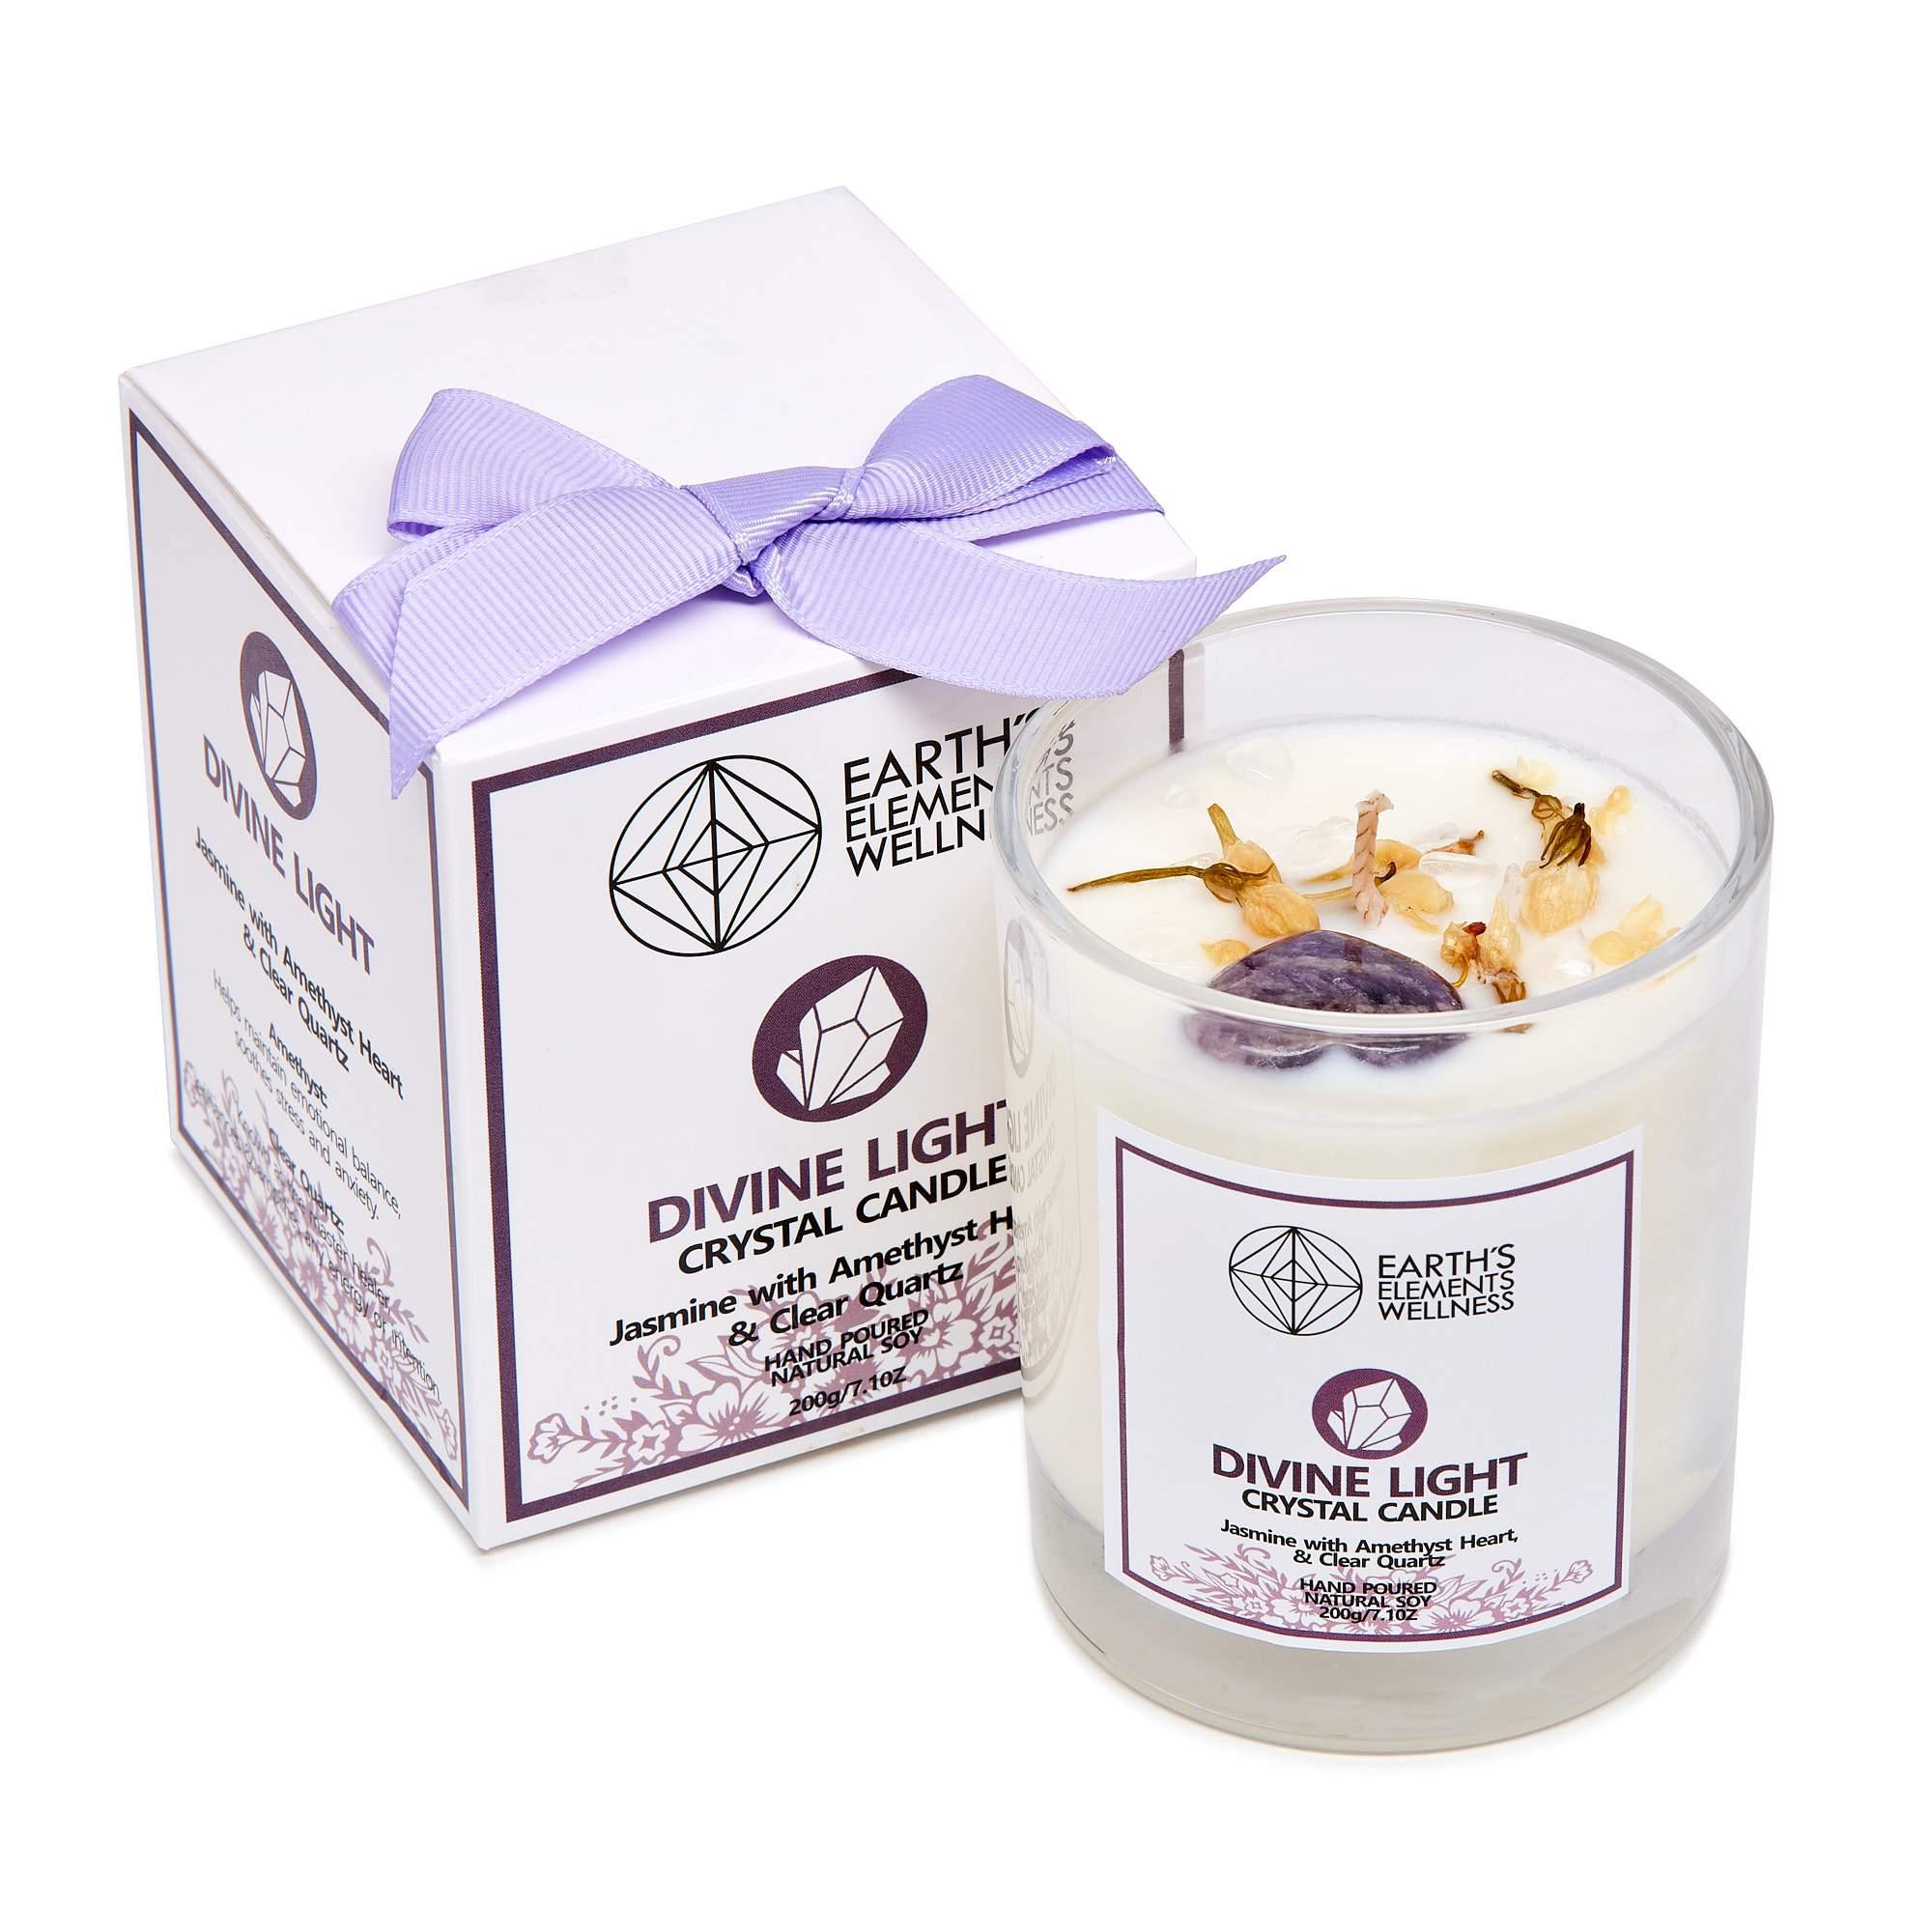 Divine Light Crystal Candle - Jasmine with Amethyst Heart and Clear Quartz - The Rutile Ltd